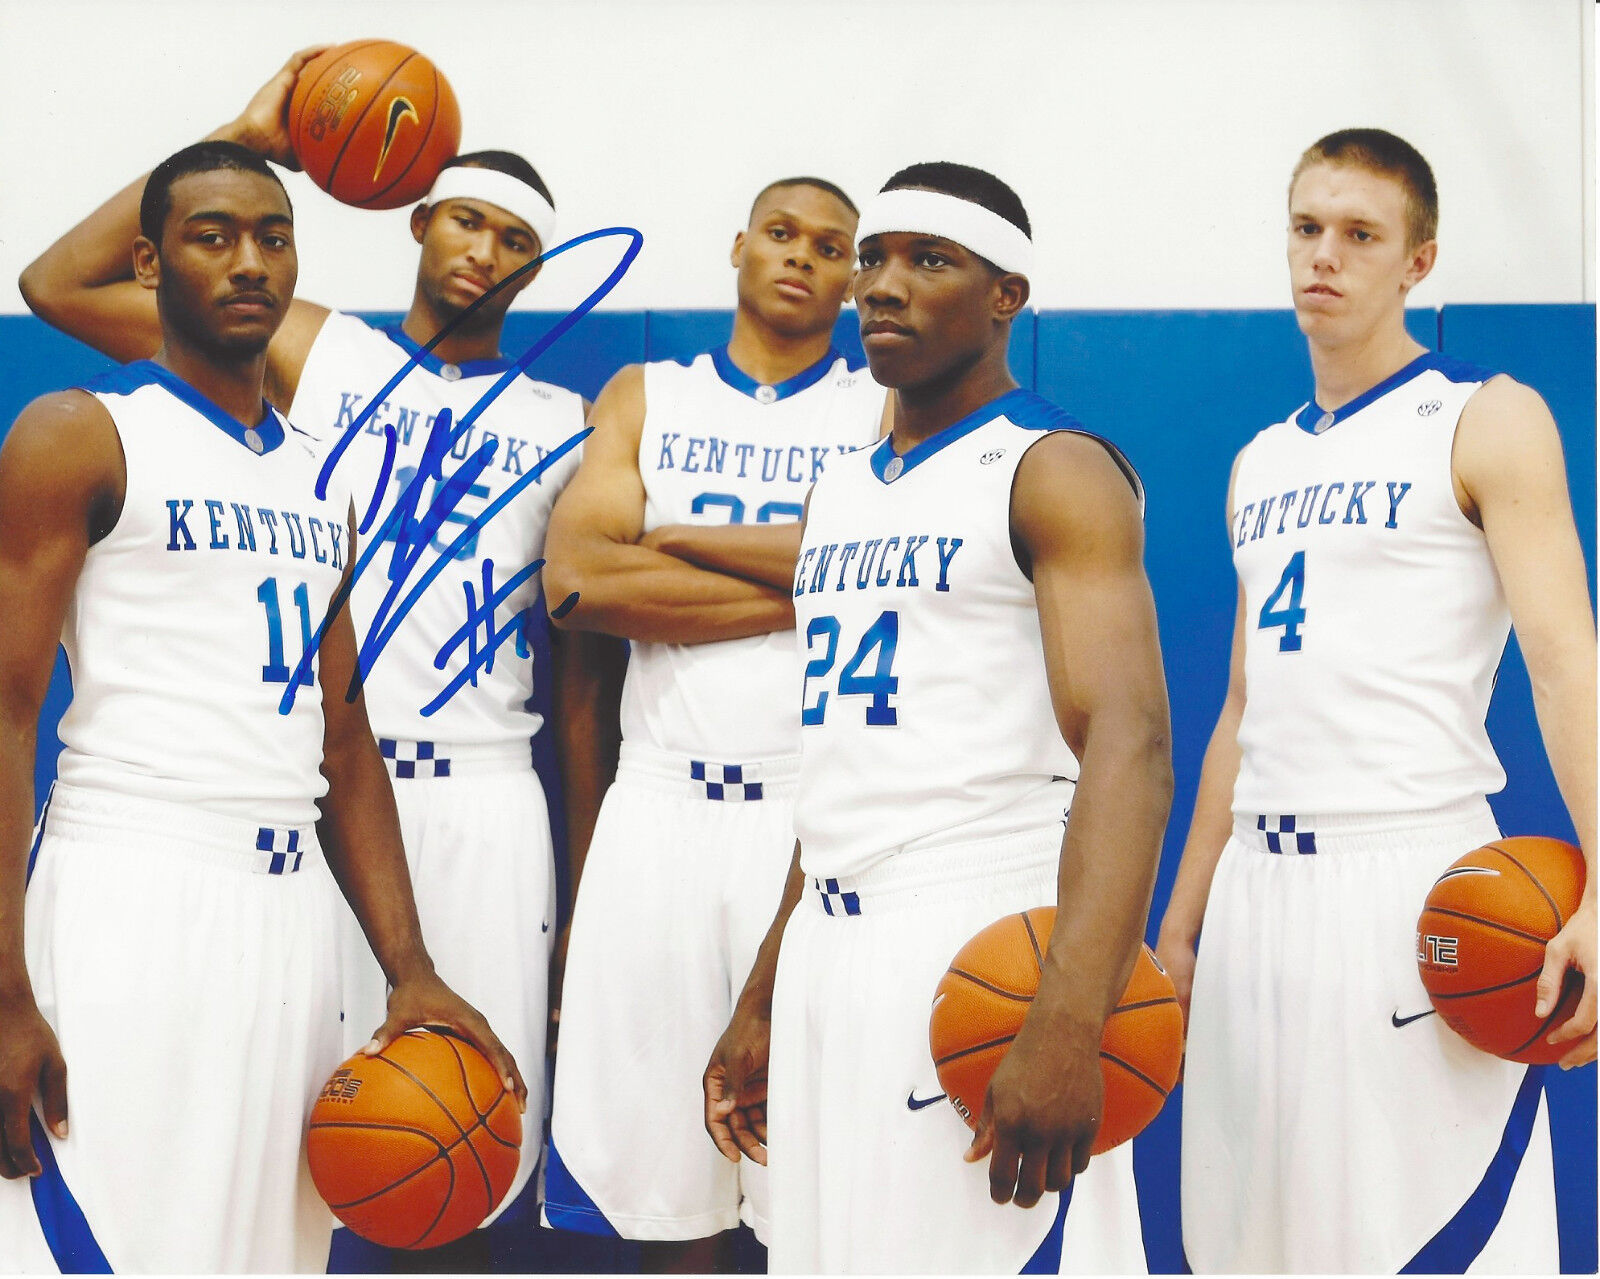 KENTUCKY DEMARCUS COUSINS SIGNED AUTHENTIC 8X10 Photo Poster painting B w/C0A NBA NCAA PELICANS